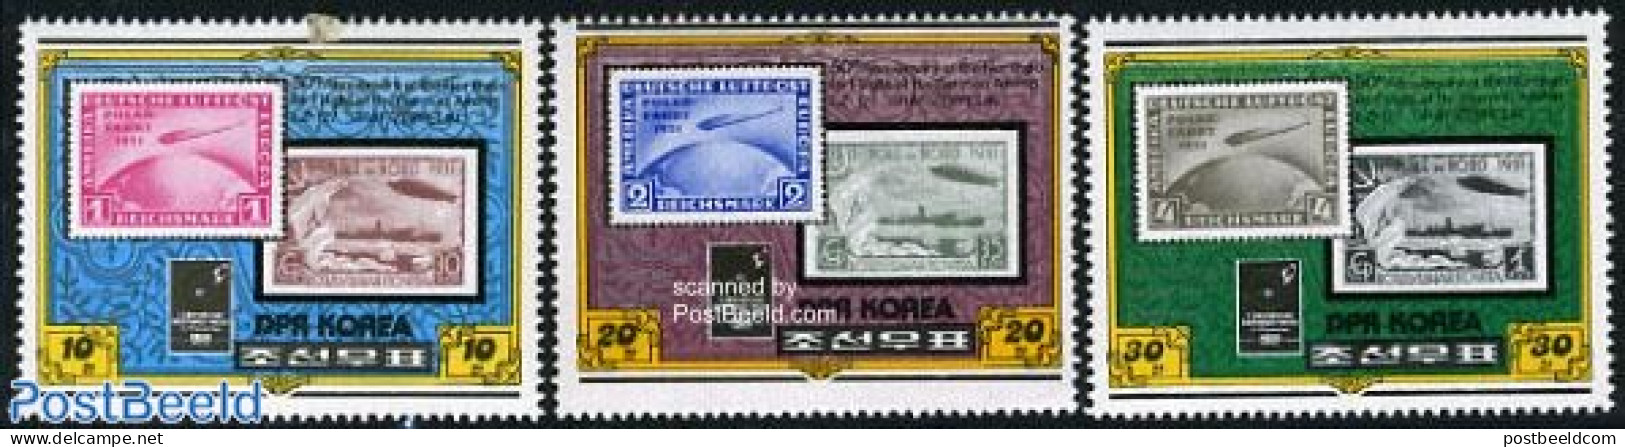 Korea, North 1980 Int. Stamp Fair Essen 3v, Mint NH, Transport - Stamps On Stamps - Ships And Boats - Zeppelins - Sellos Sobre Sellos